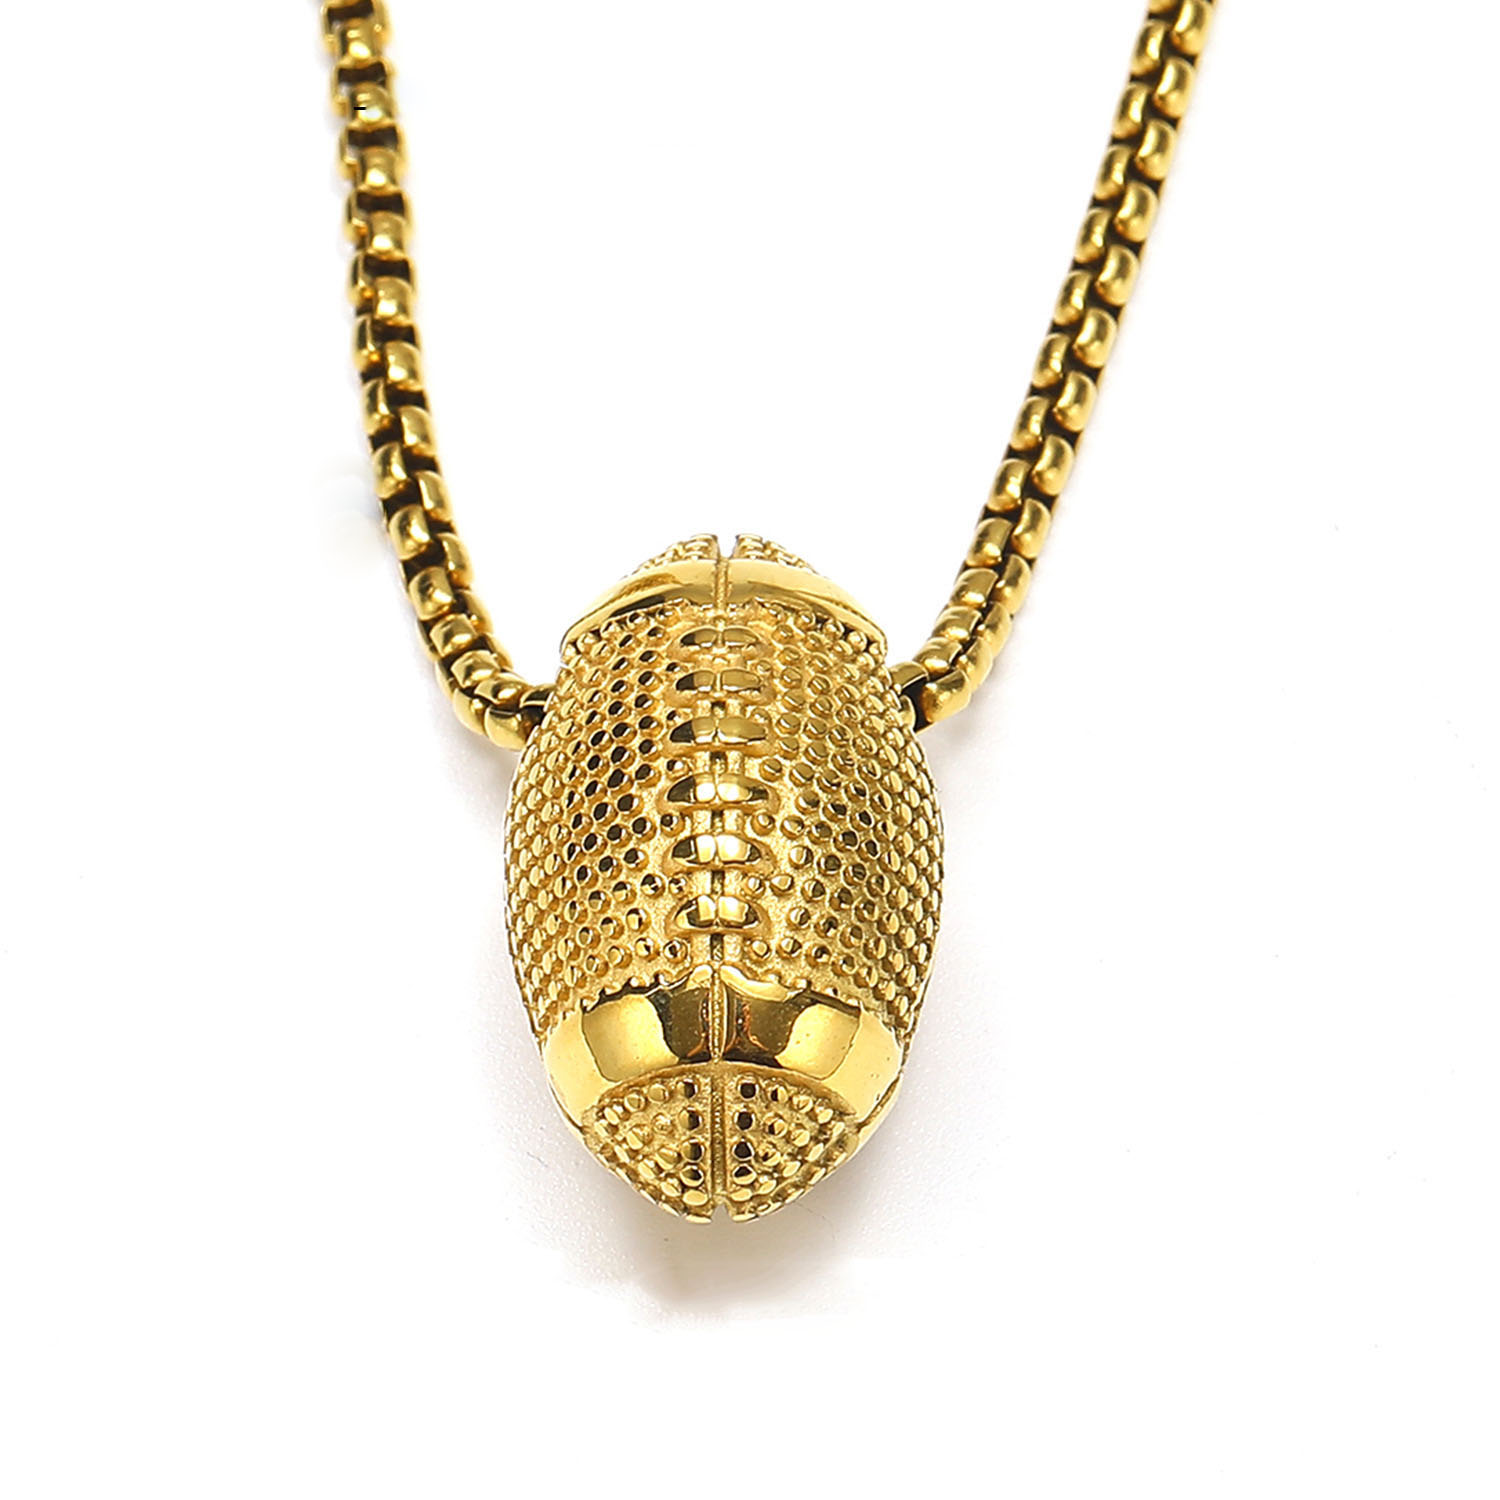 6:Gold necklace